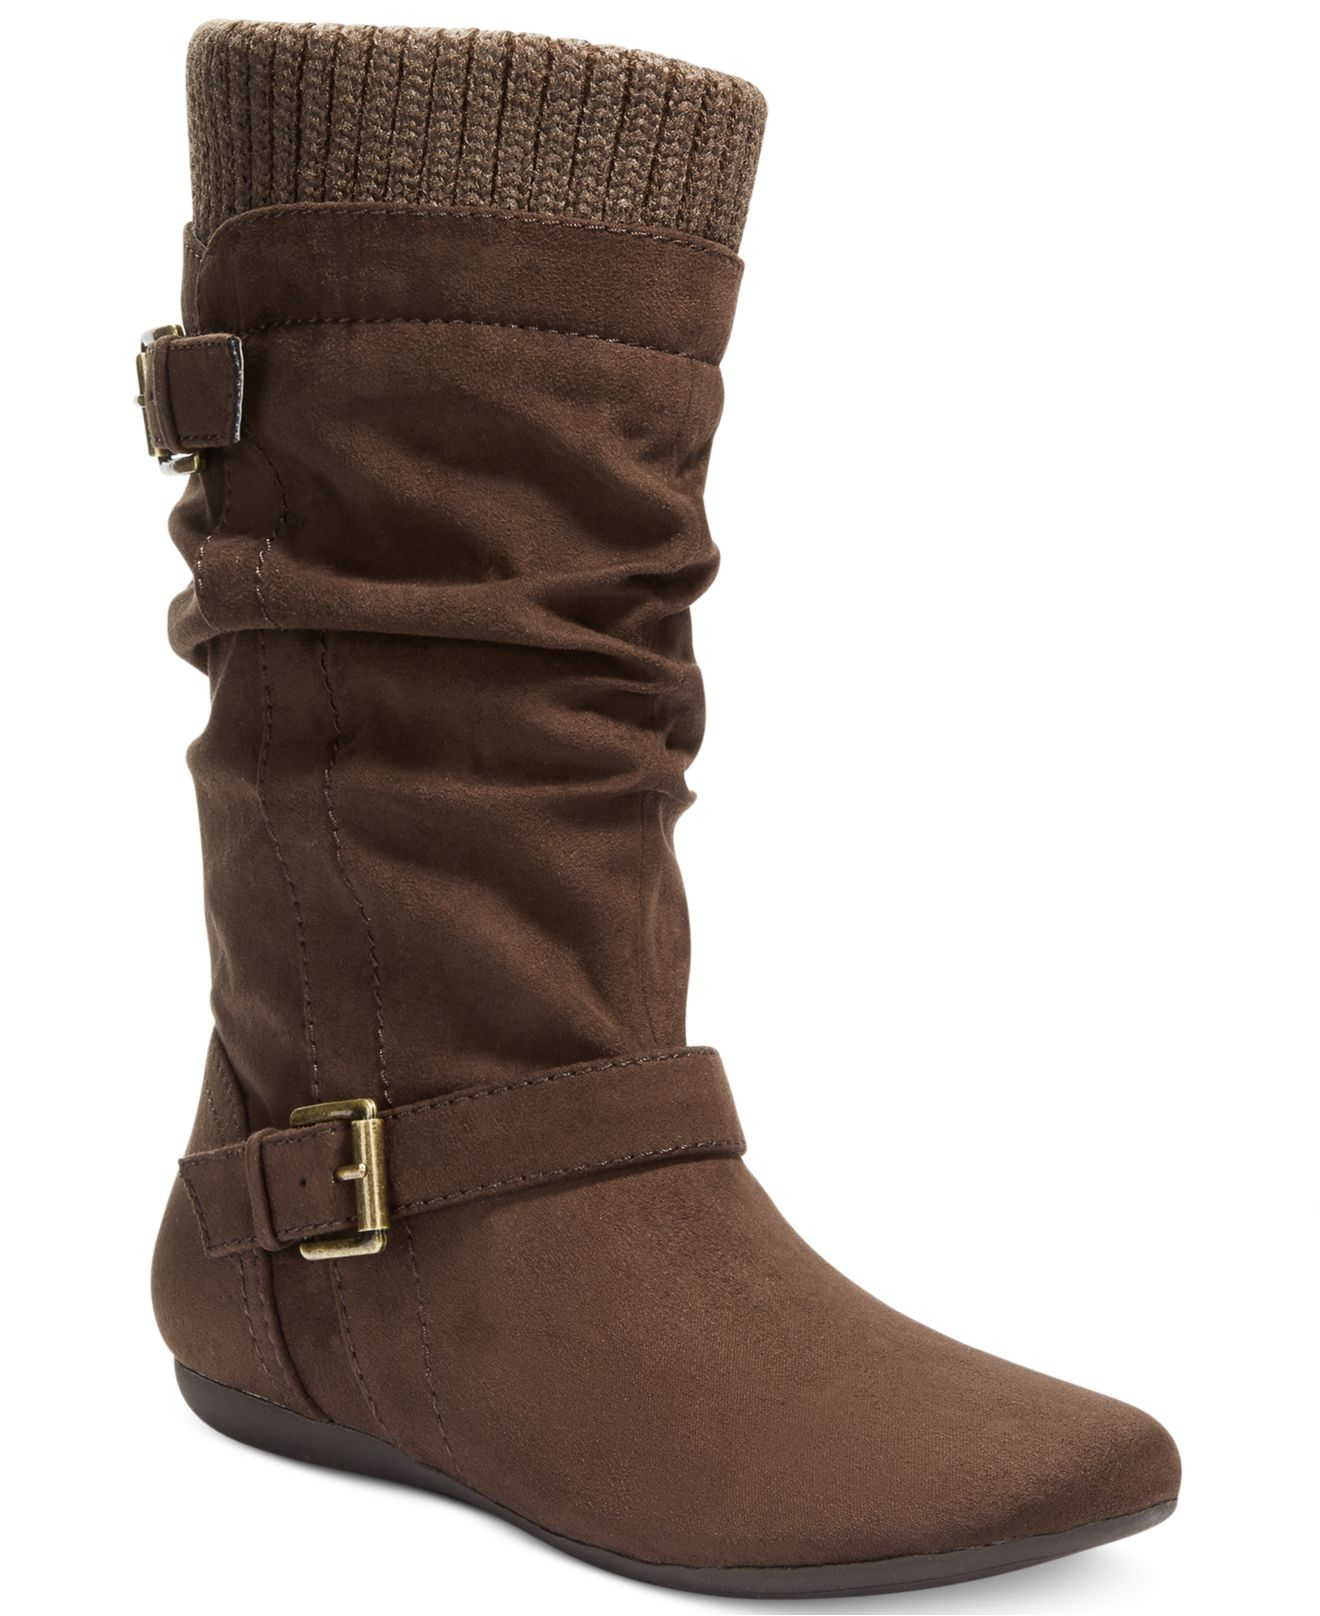 Lyst - Report Everton Slouchy Sweater Boots in Brown